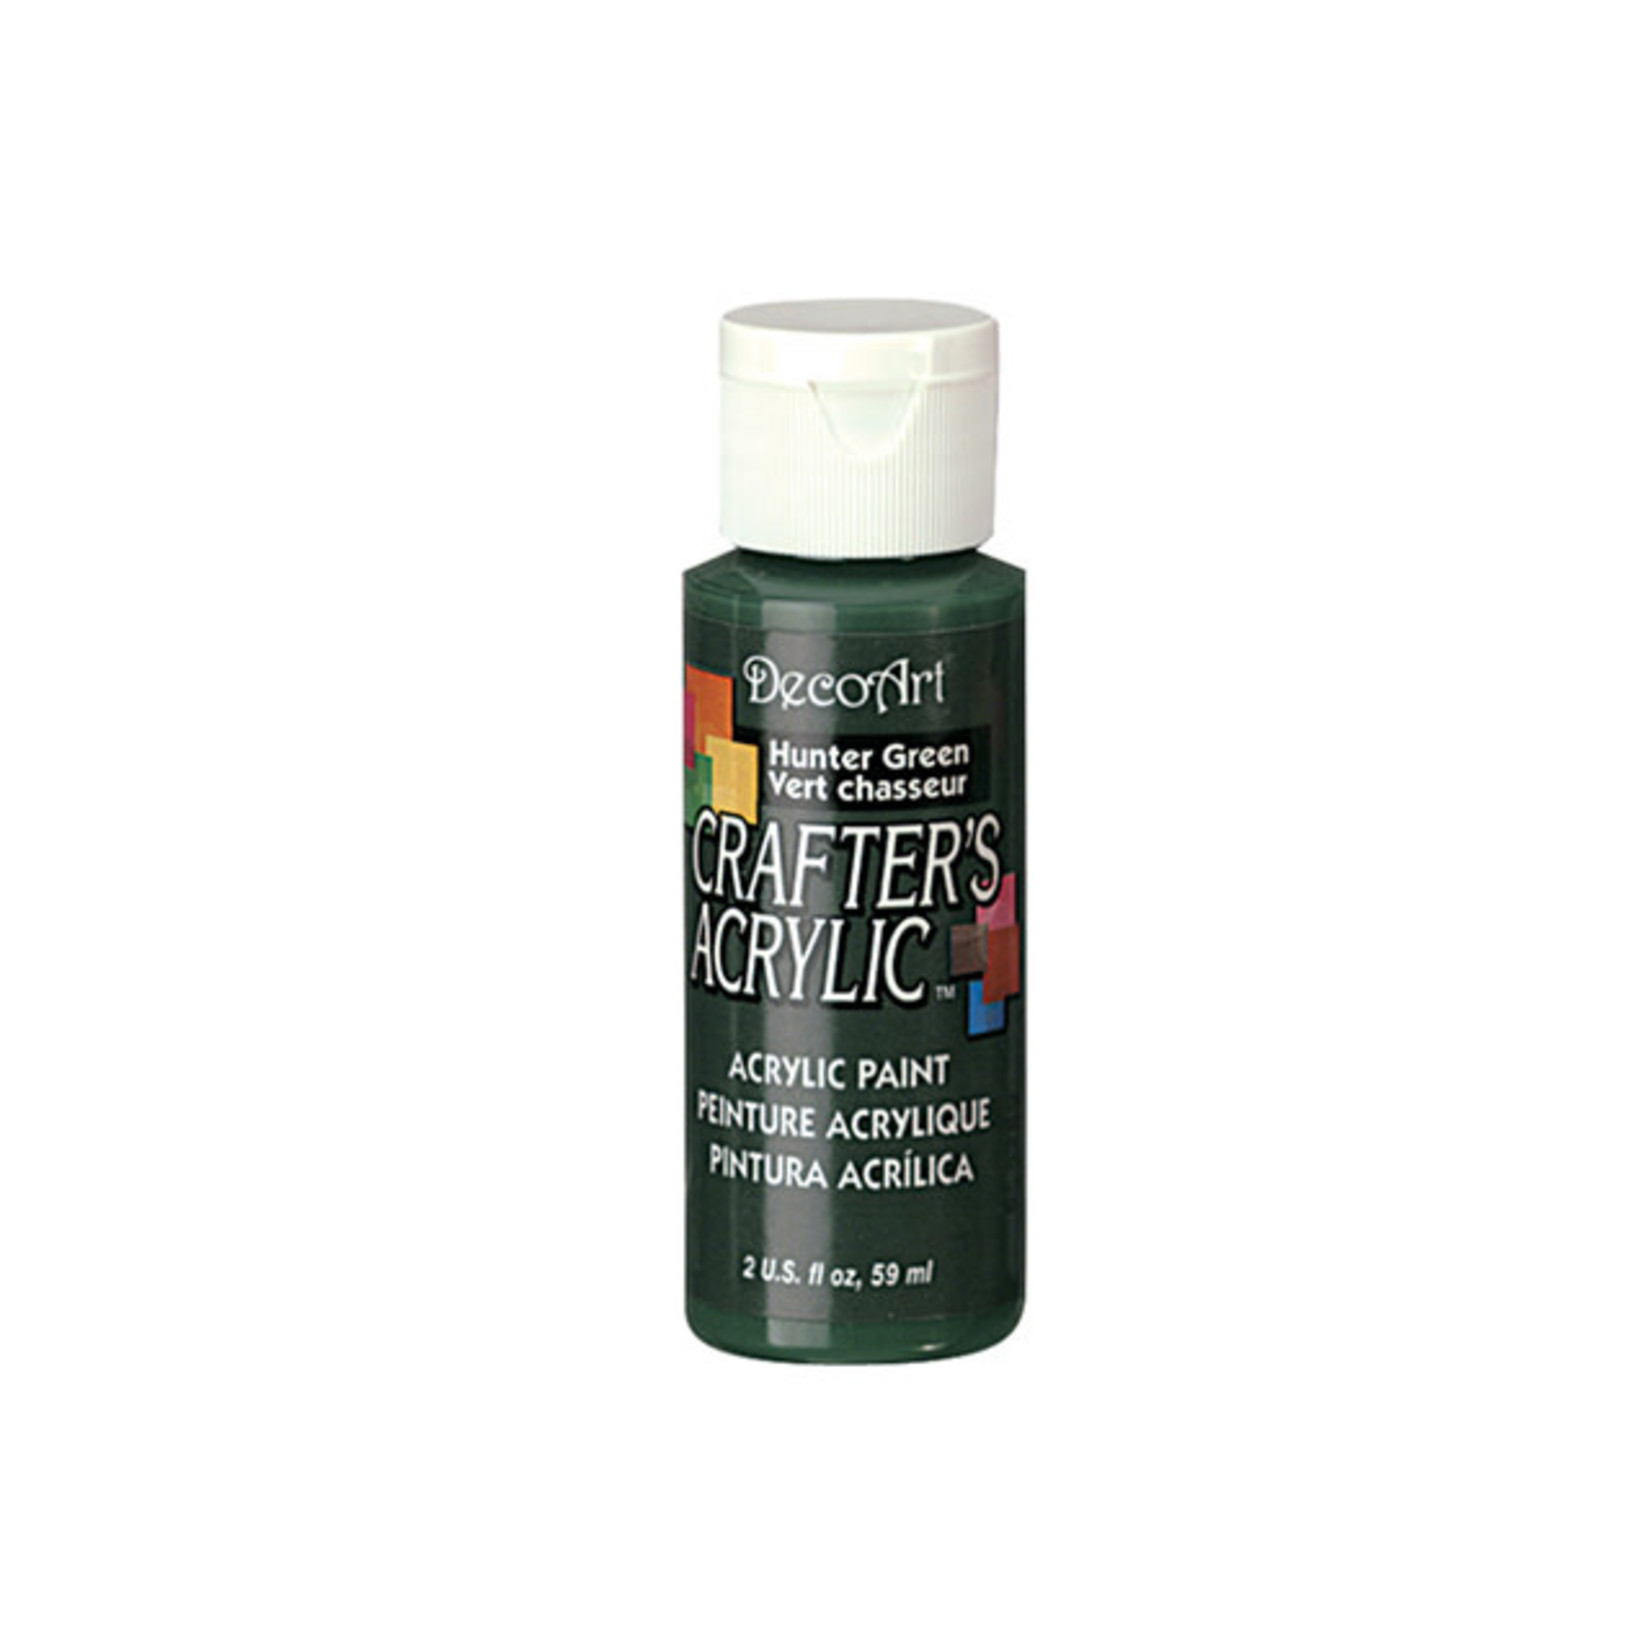 CRAFTERS ACRYLIC PAINT - 2 OZ CRAFT & HOBBY- 41 HUNTER GREEN